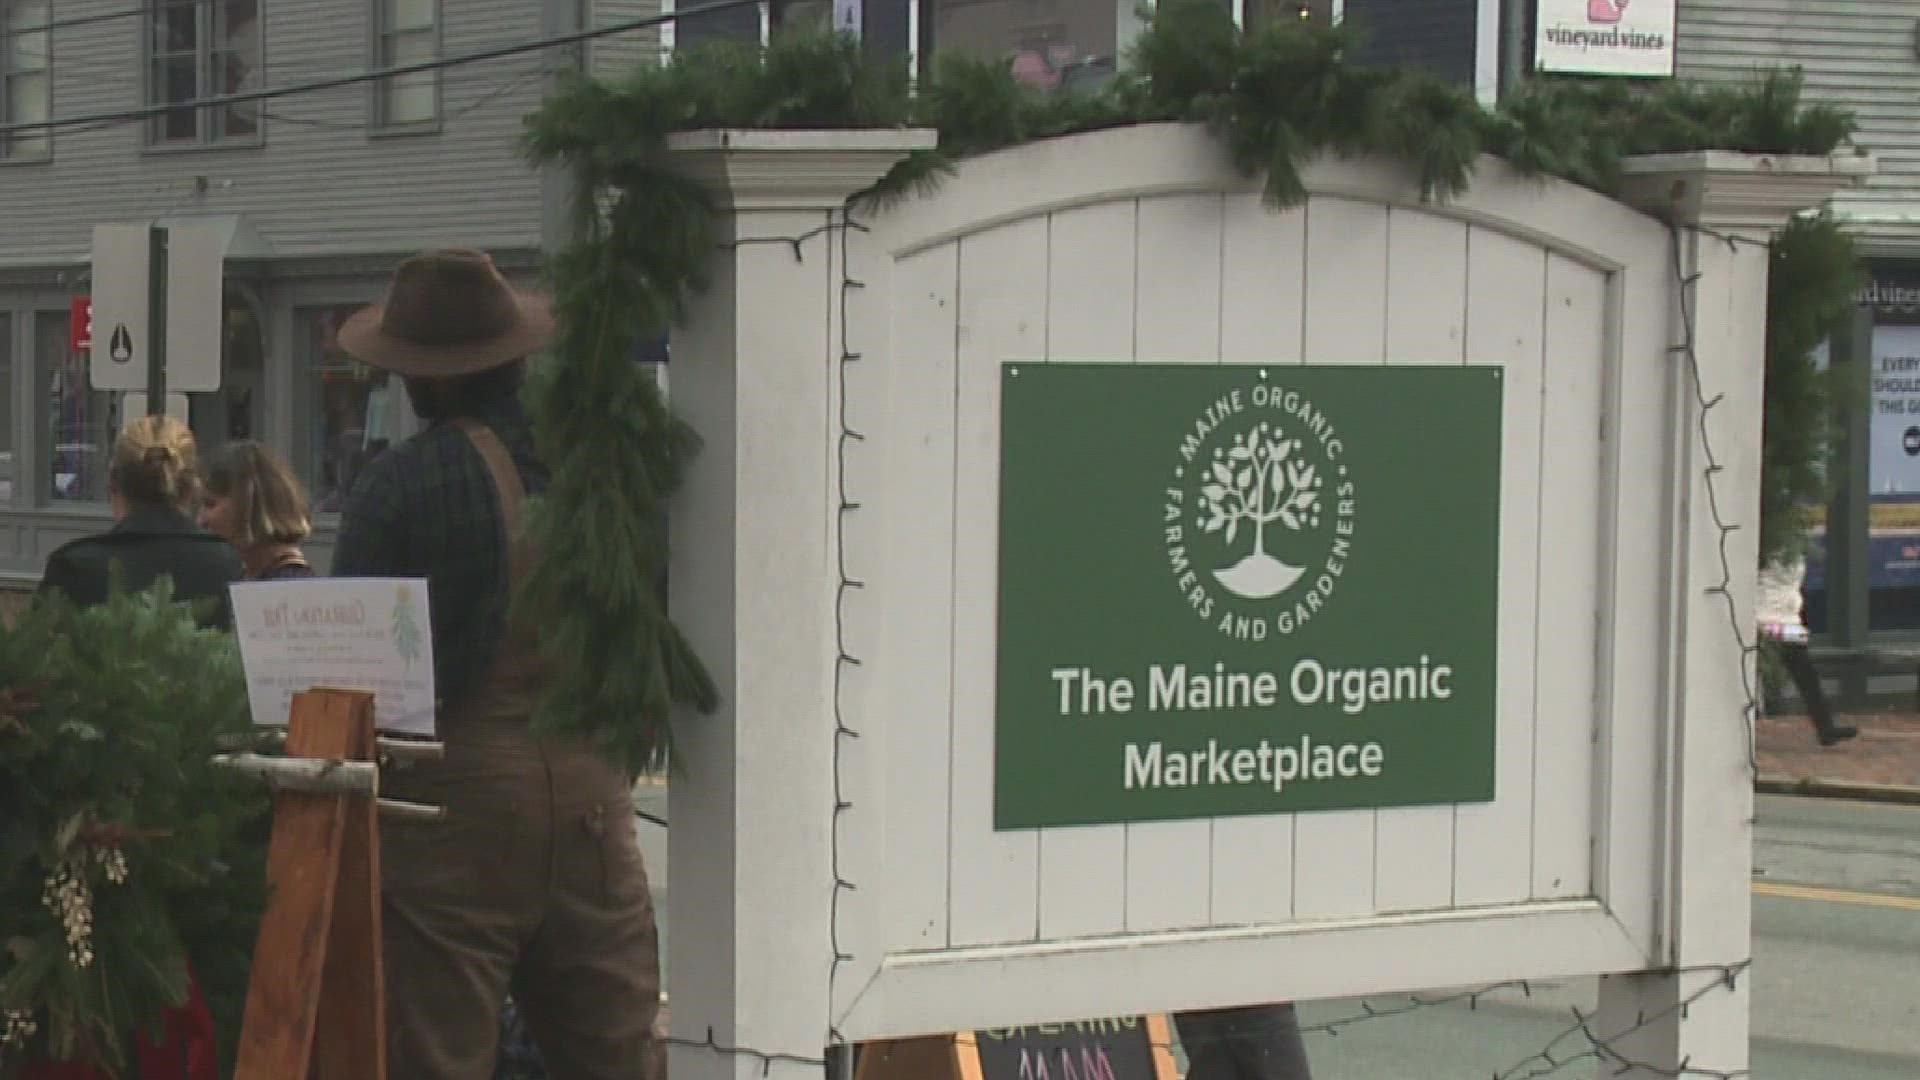 The Maine Organic Marketplace is a project by the Maine Organic Farmers and Gardeners Association to provide sustainably sourced and organic Maine-made goods.